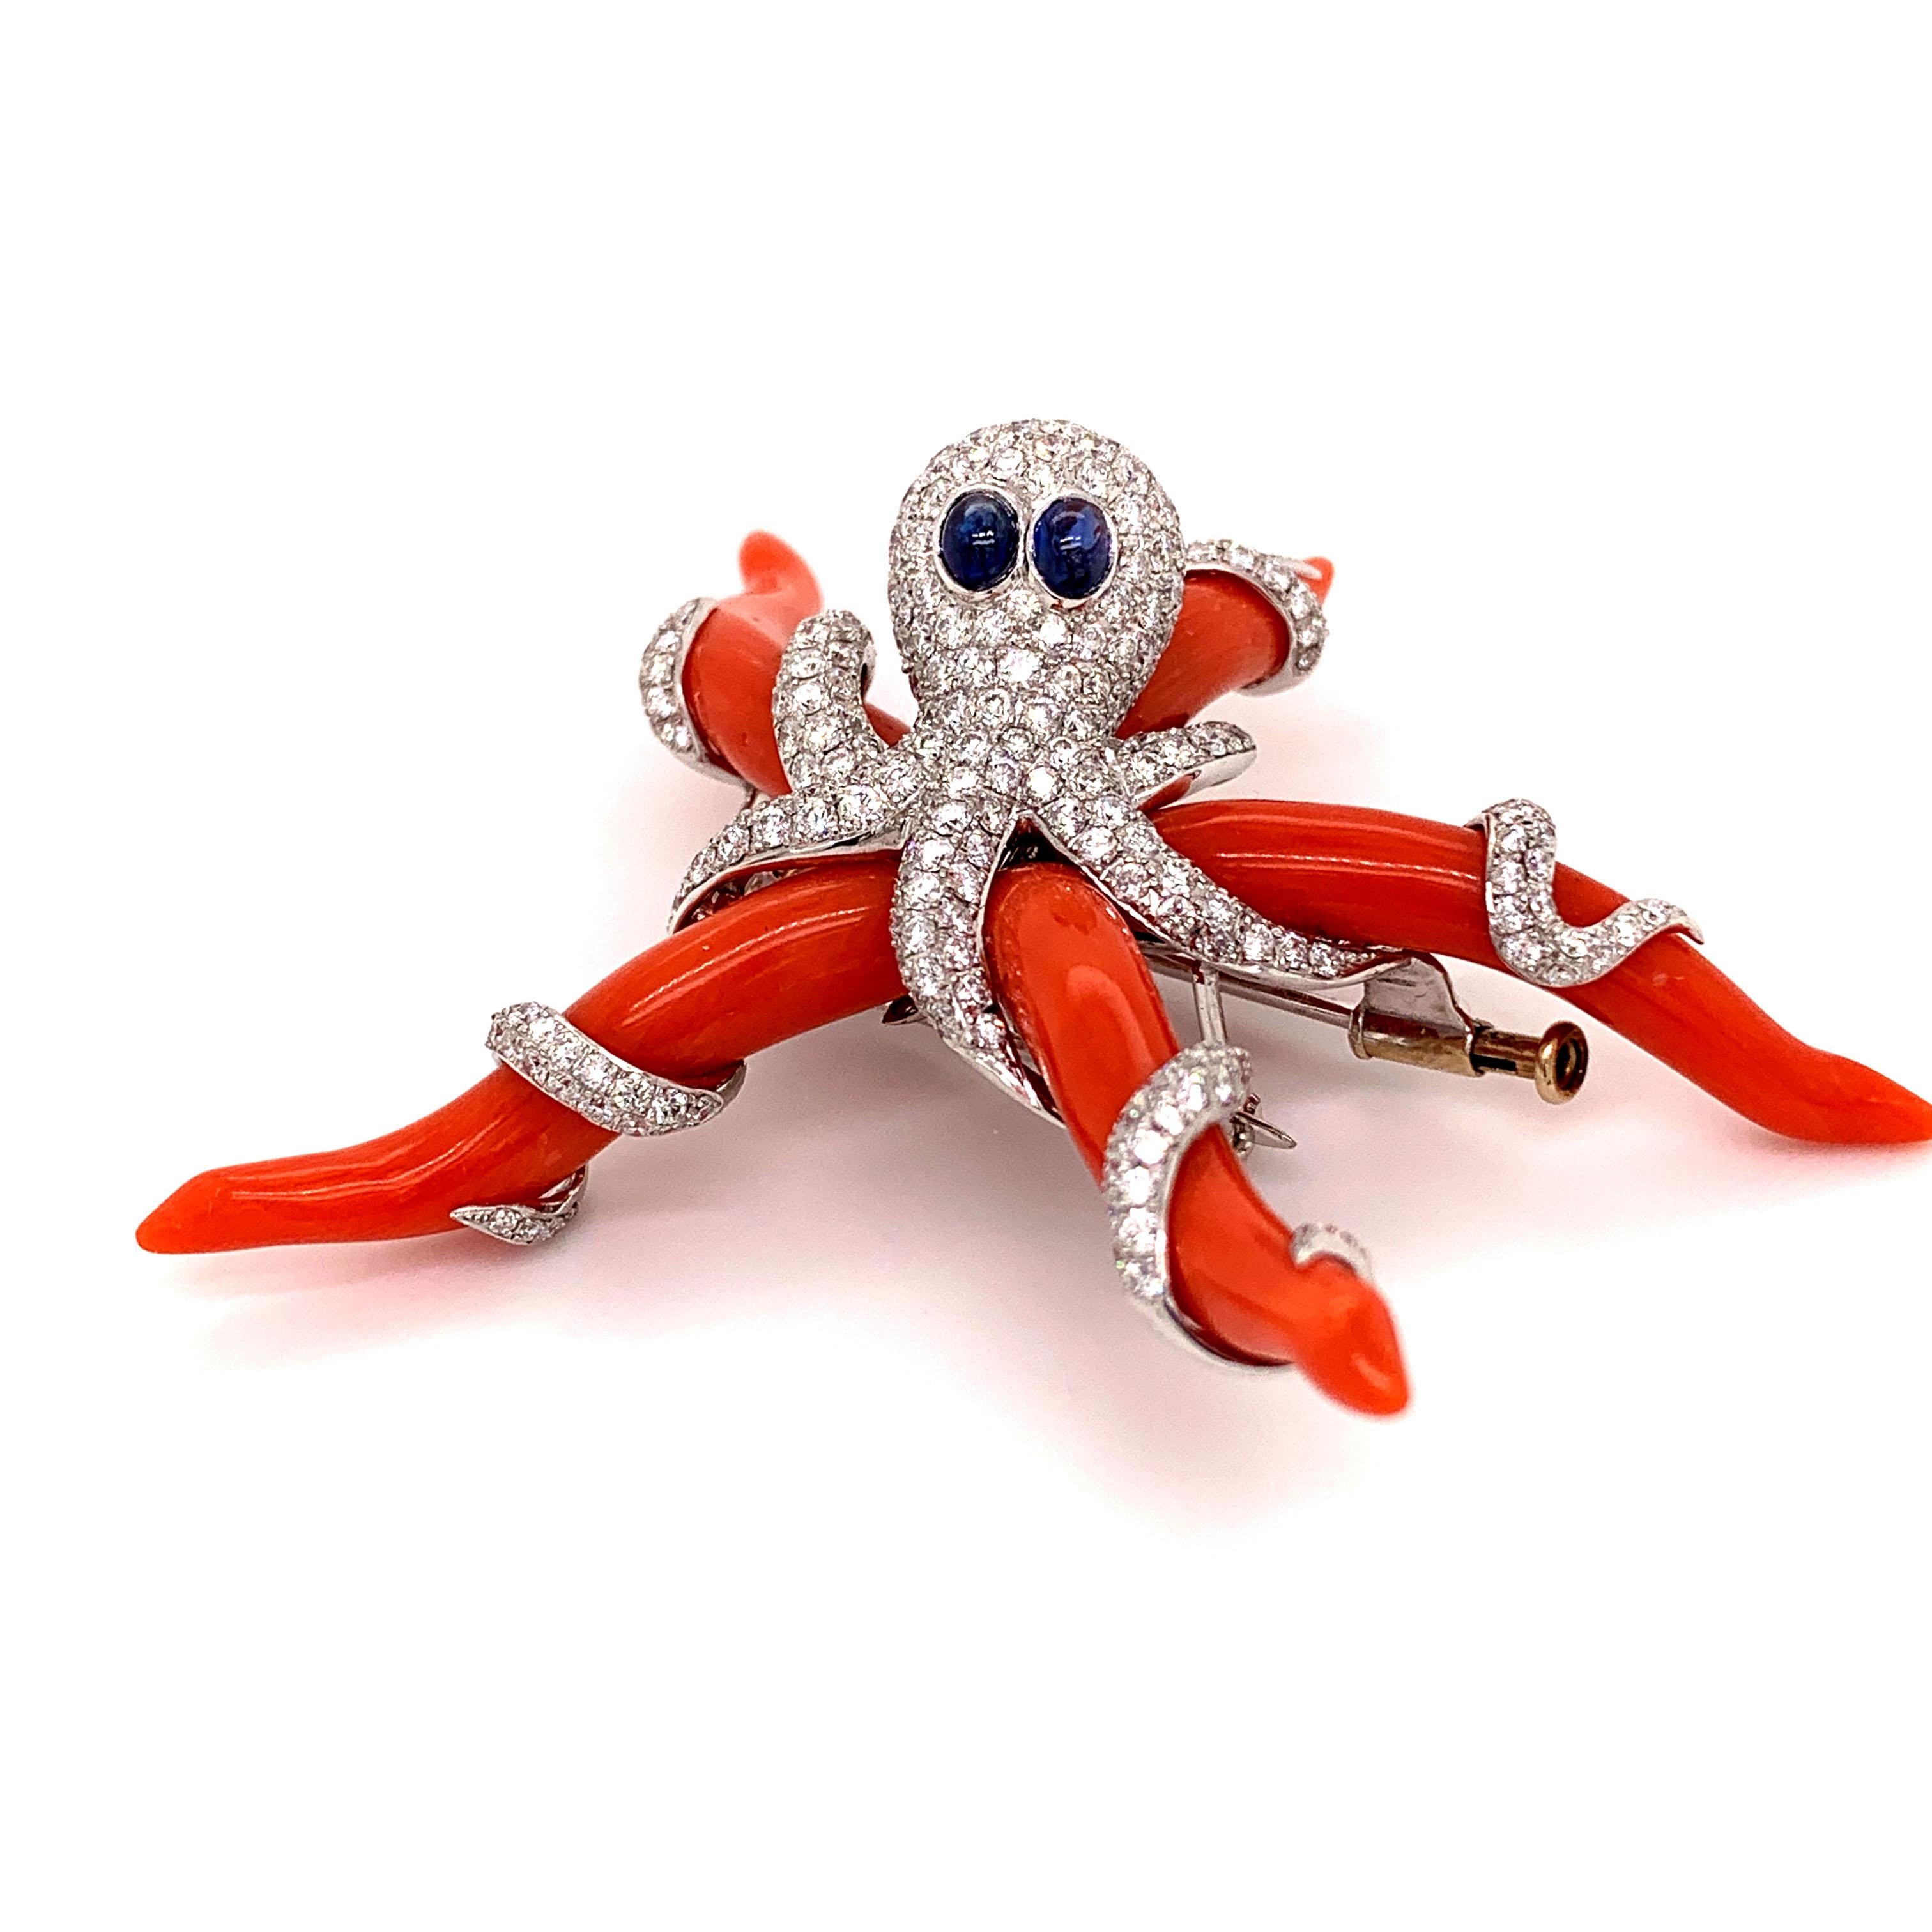 Round Cut Sophia D, 39.12 Carat Octopus Coral Brooch with Diamond and Sapphire For Sale